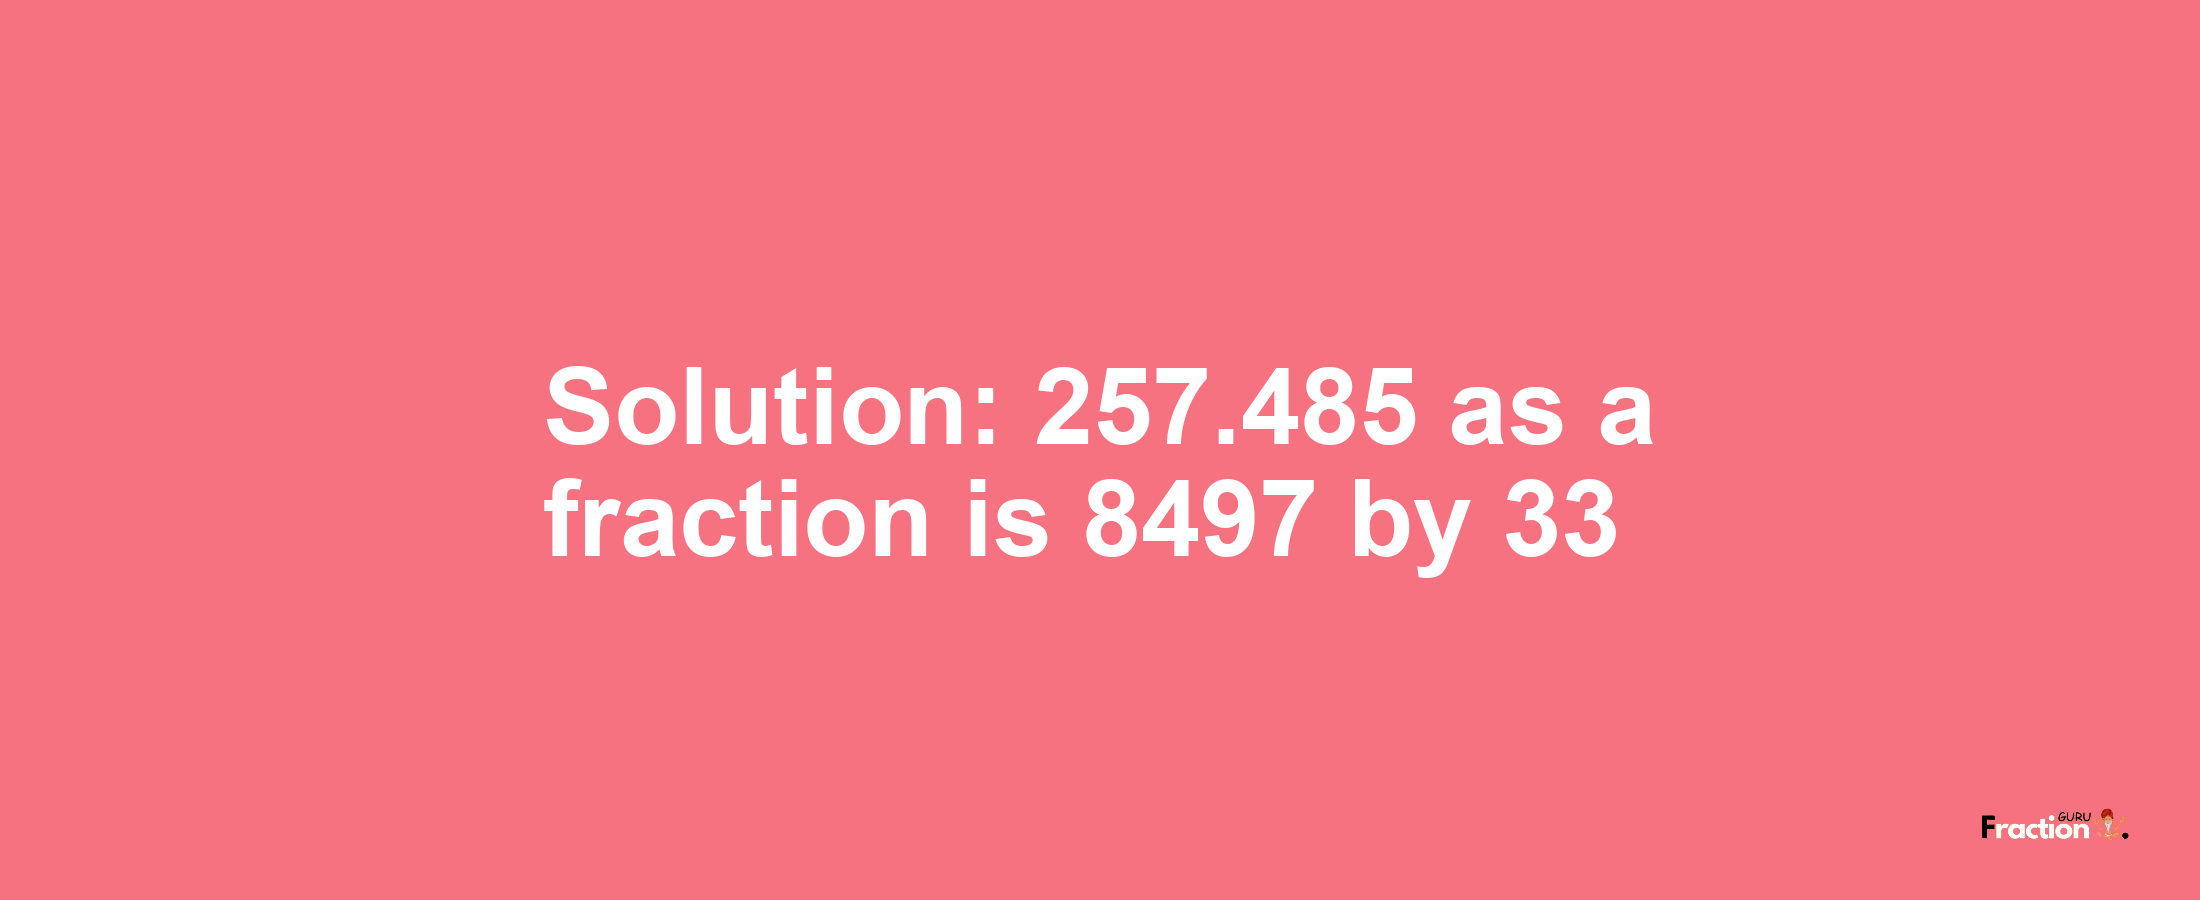 Solution:257.485 as a fraction is 8497/33